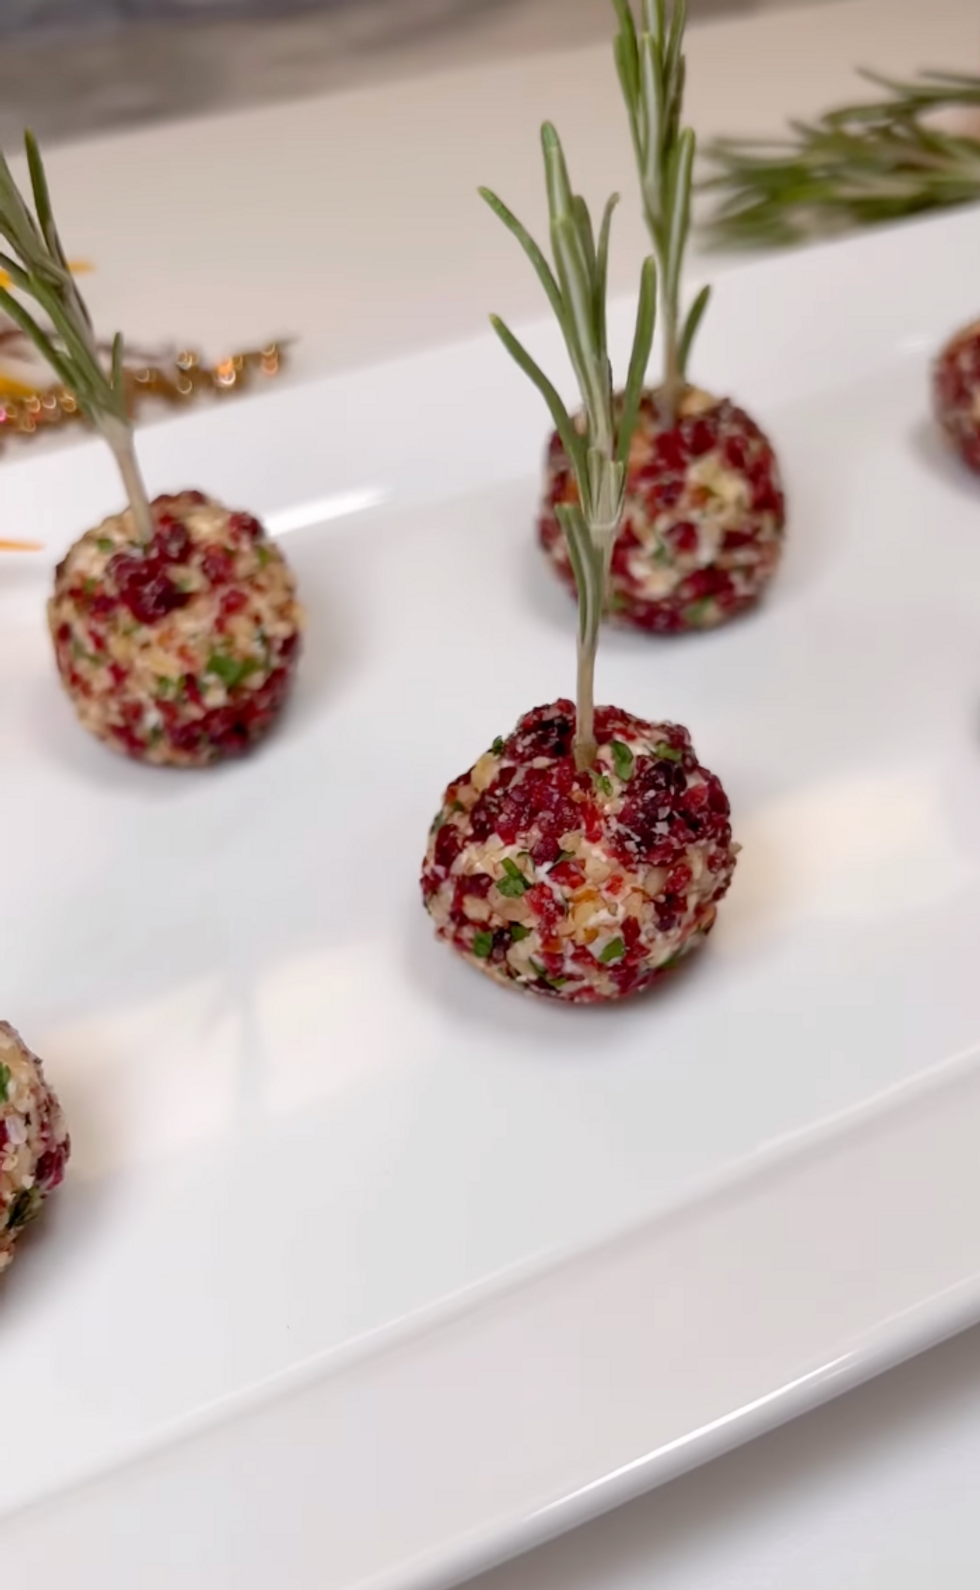 \u200bCranberry Goat Cheese Balls with Rosemary Skewers